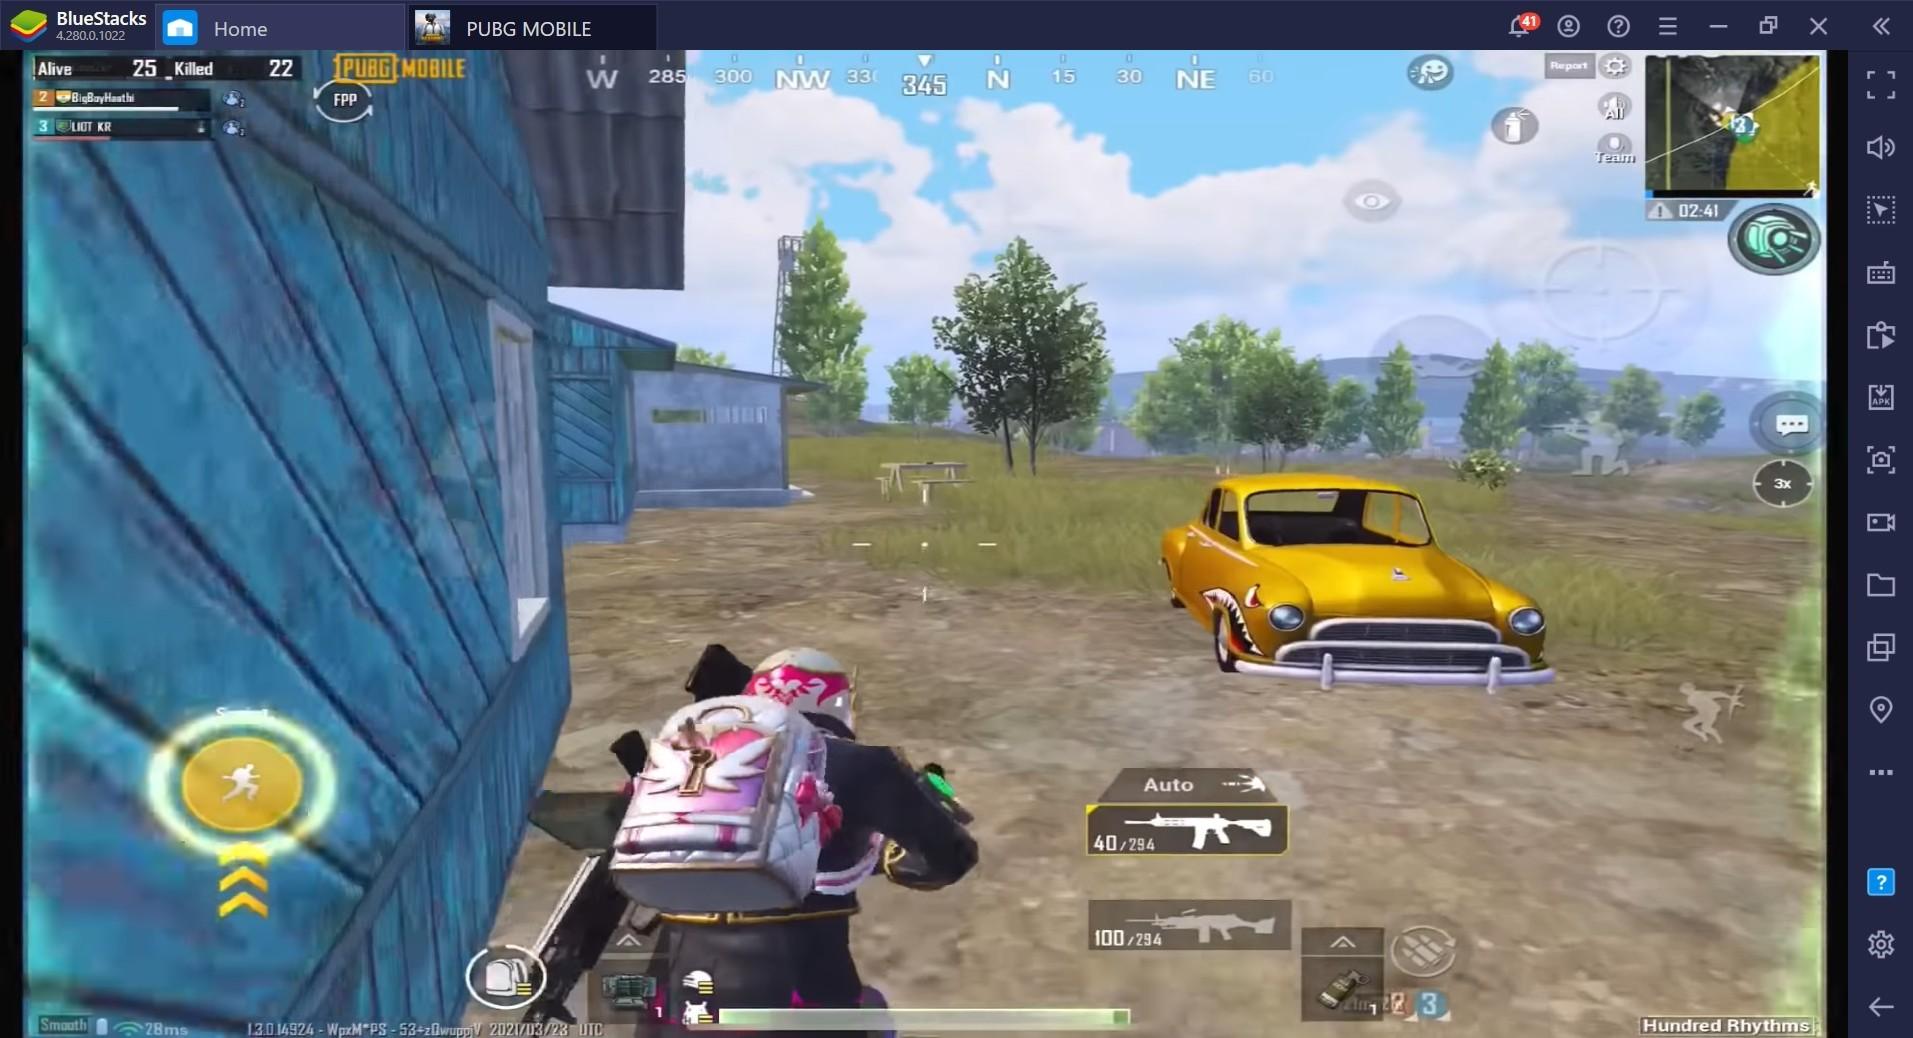 PUBG Mobile: The BlueStacks Camping Guide for Faster Rank Push